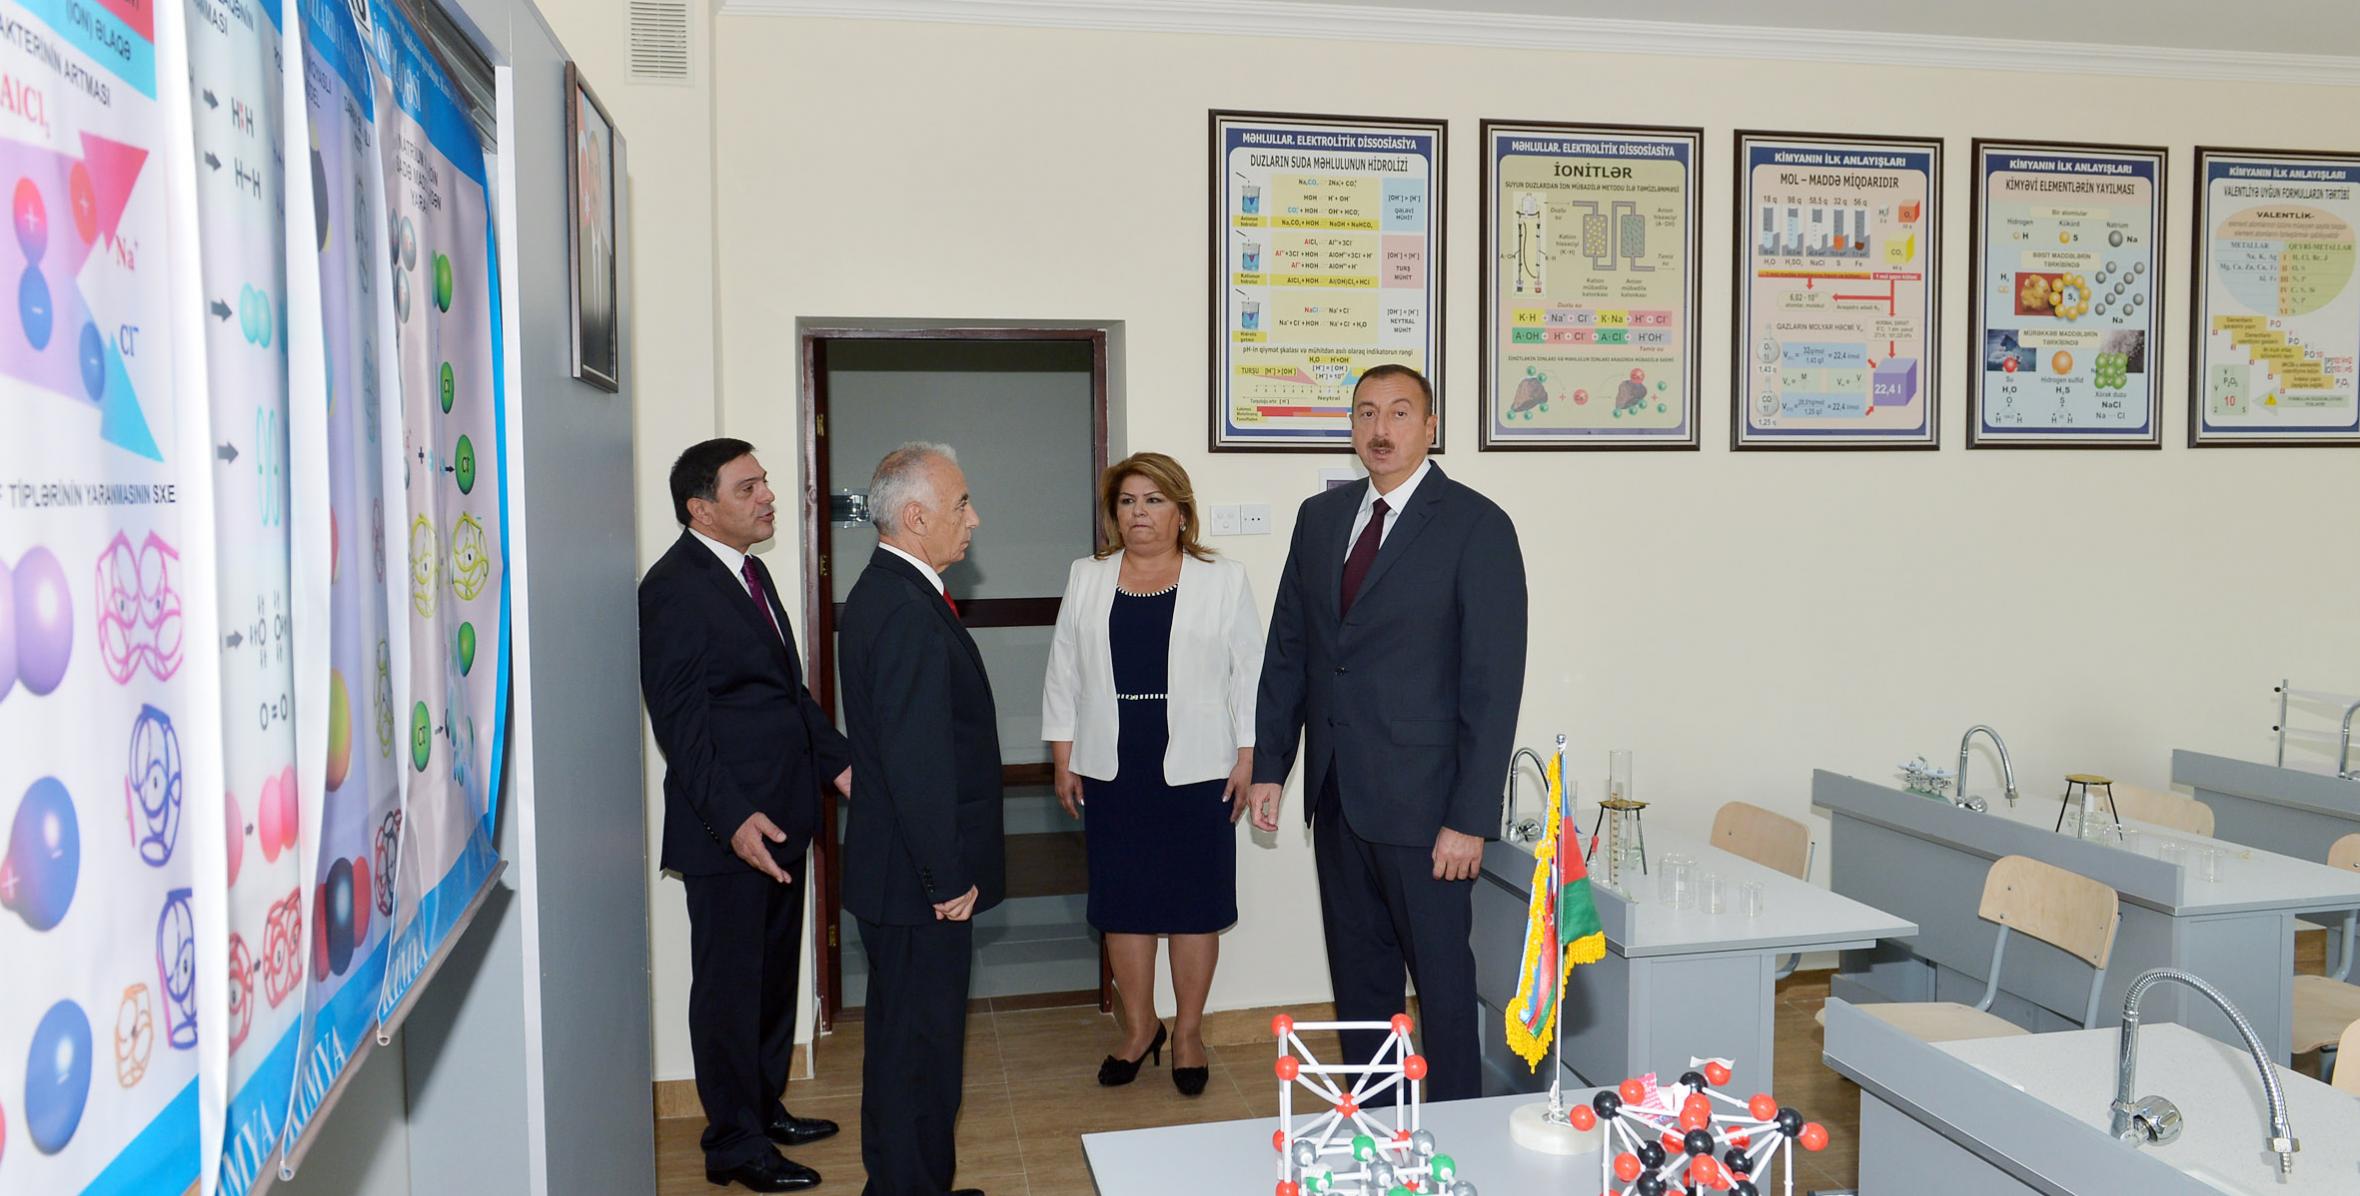 Ilham Aliyev attended the opening of a new building of school No. 182 in Baku